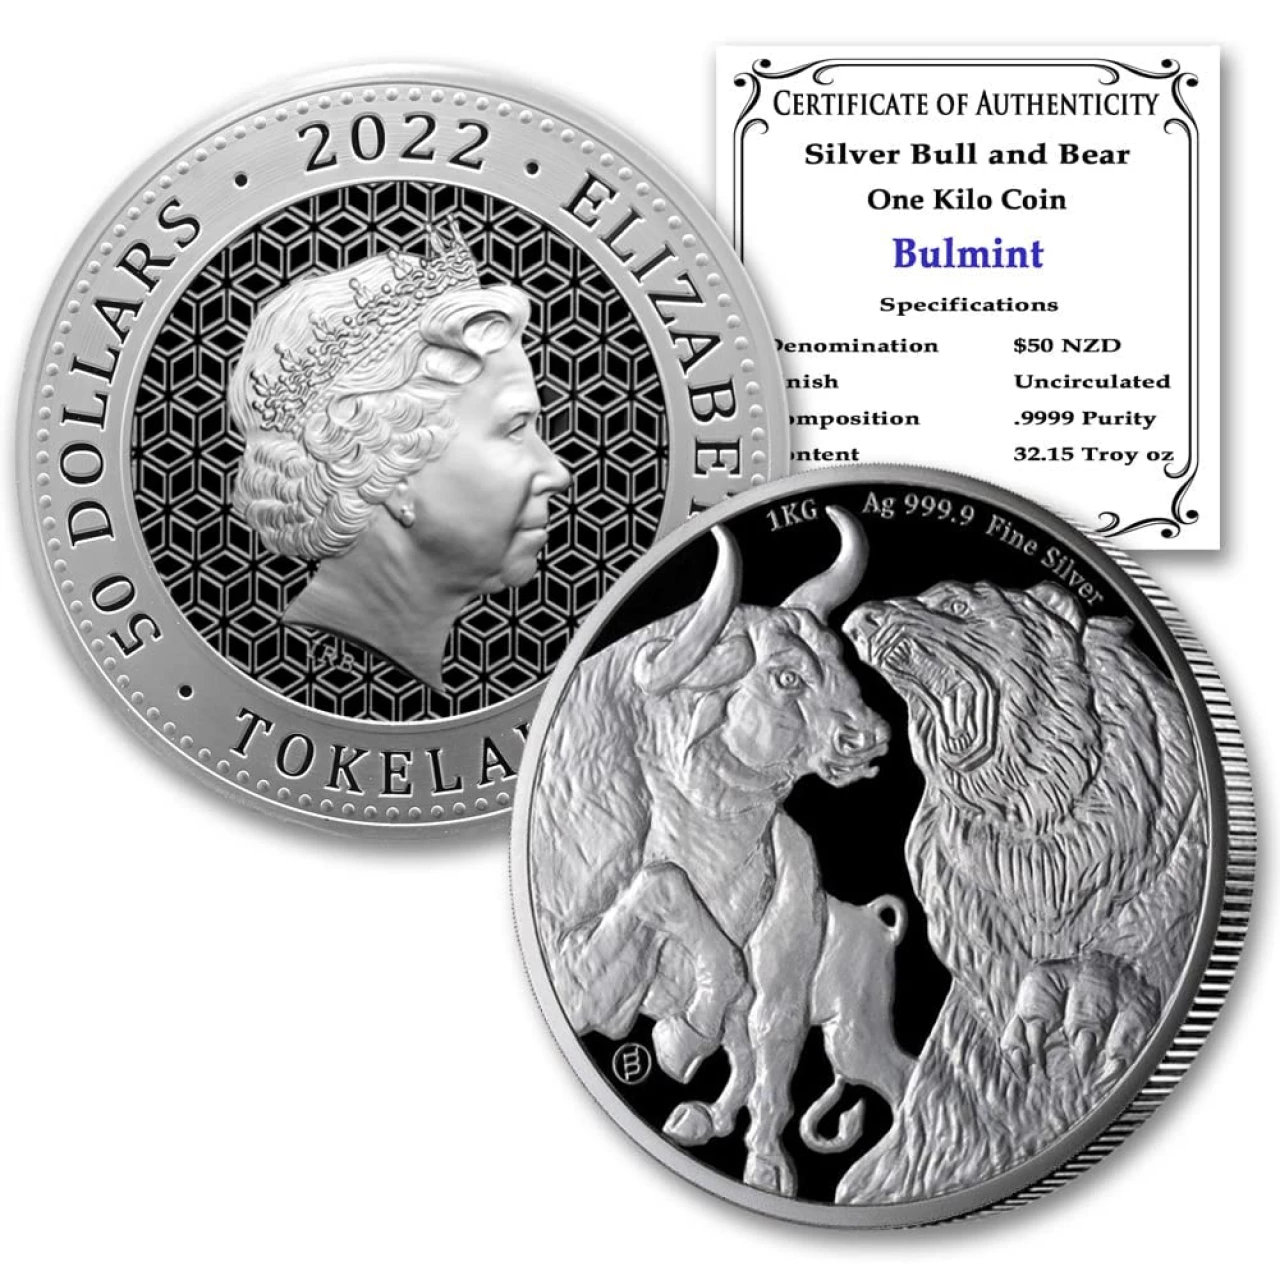 2022 1 Kilo (32.15 Troy Ounces) Tokelauan Silver Bull &amp; Bear Coin Brilliant Uncirculated Paperweight (BU) with Certificate of Authenticity $50 BU